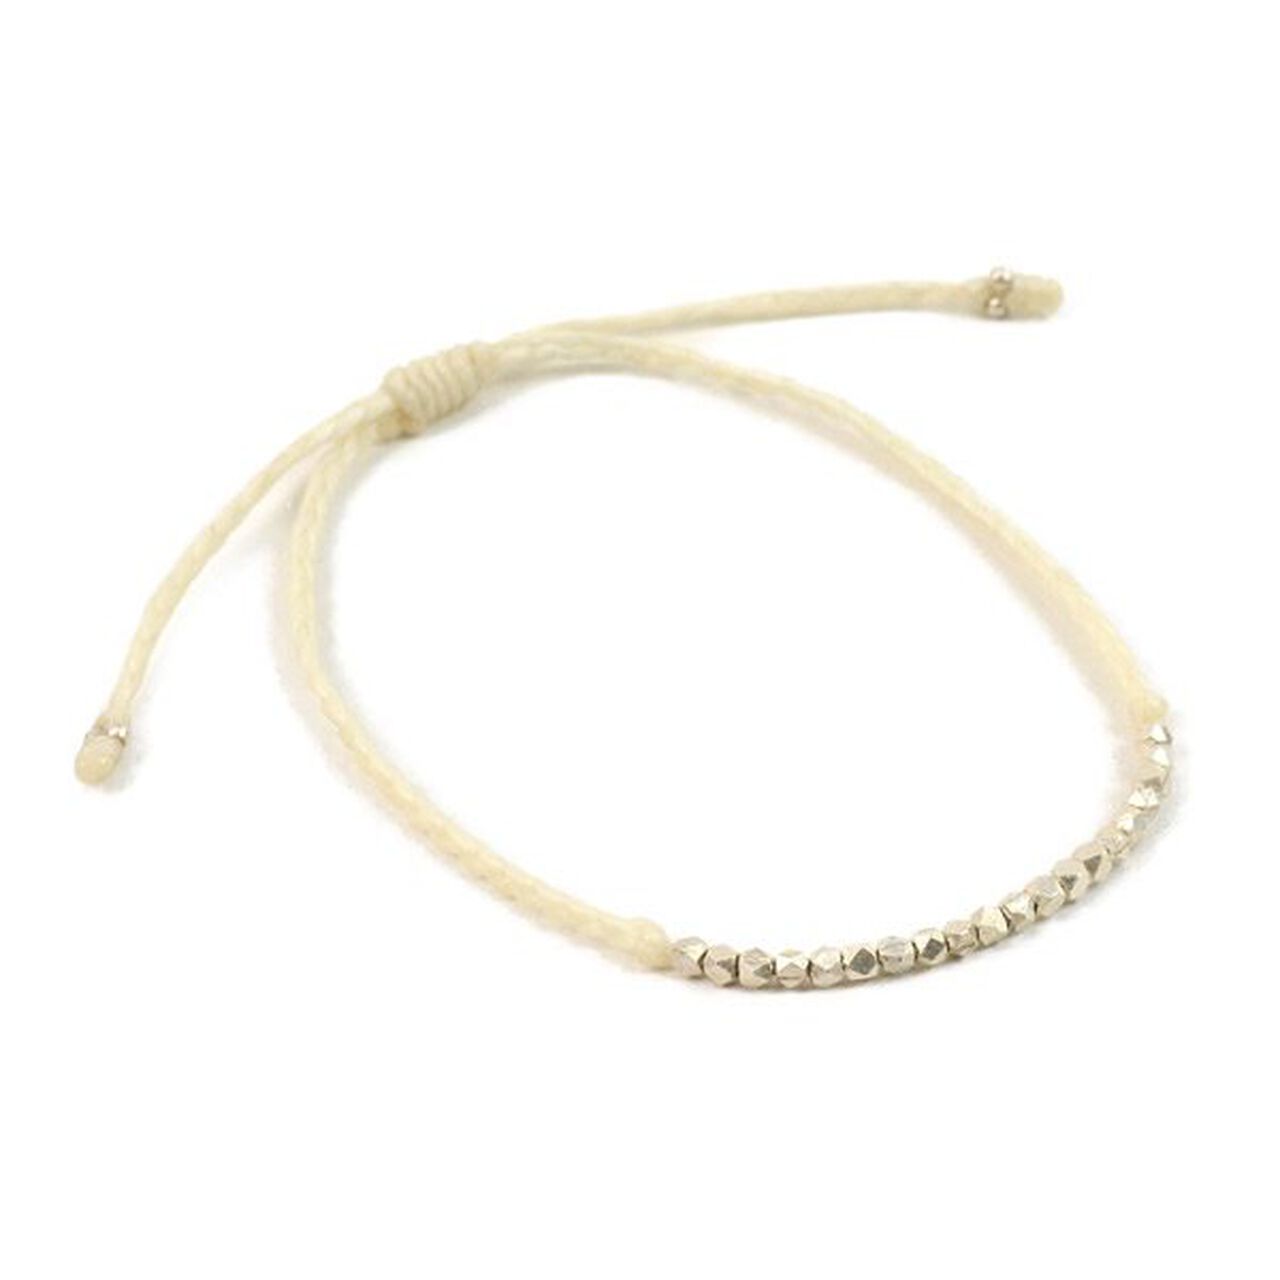 Karen Silver Bead Wax Cord Anklet,White, large image number 0